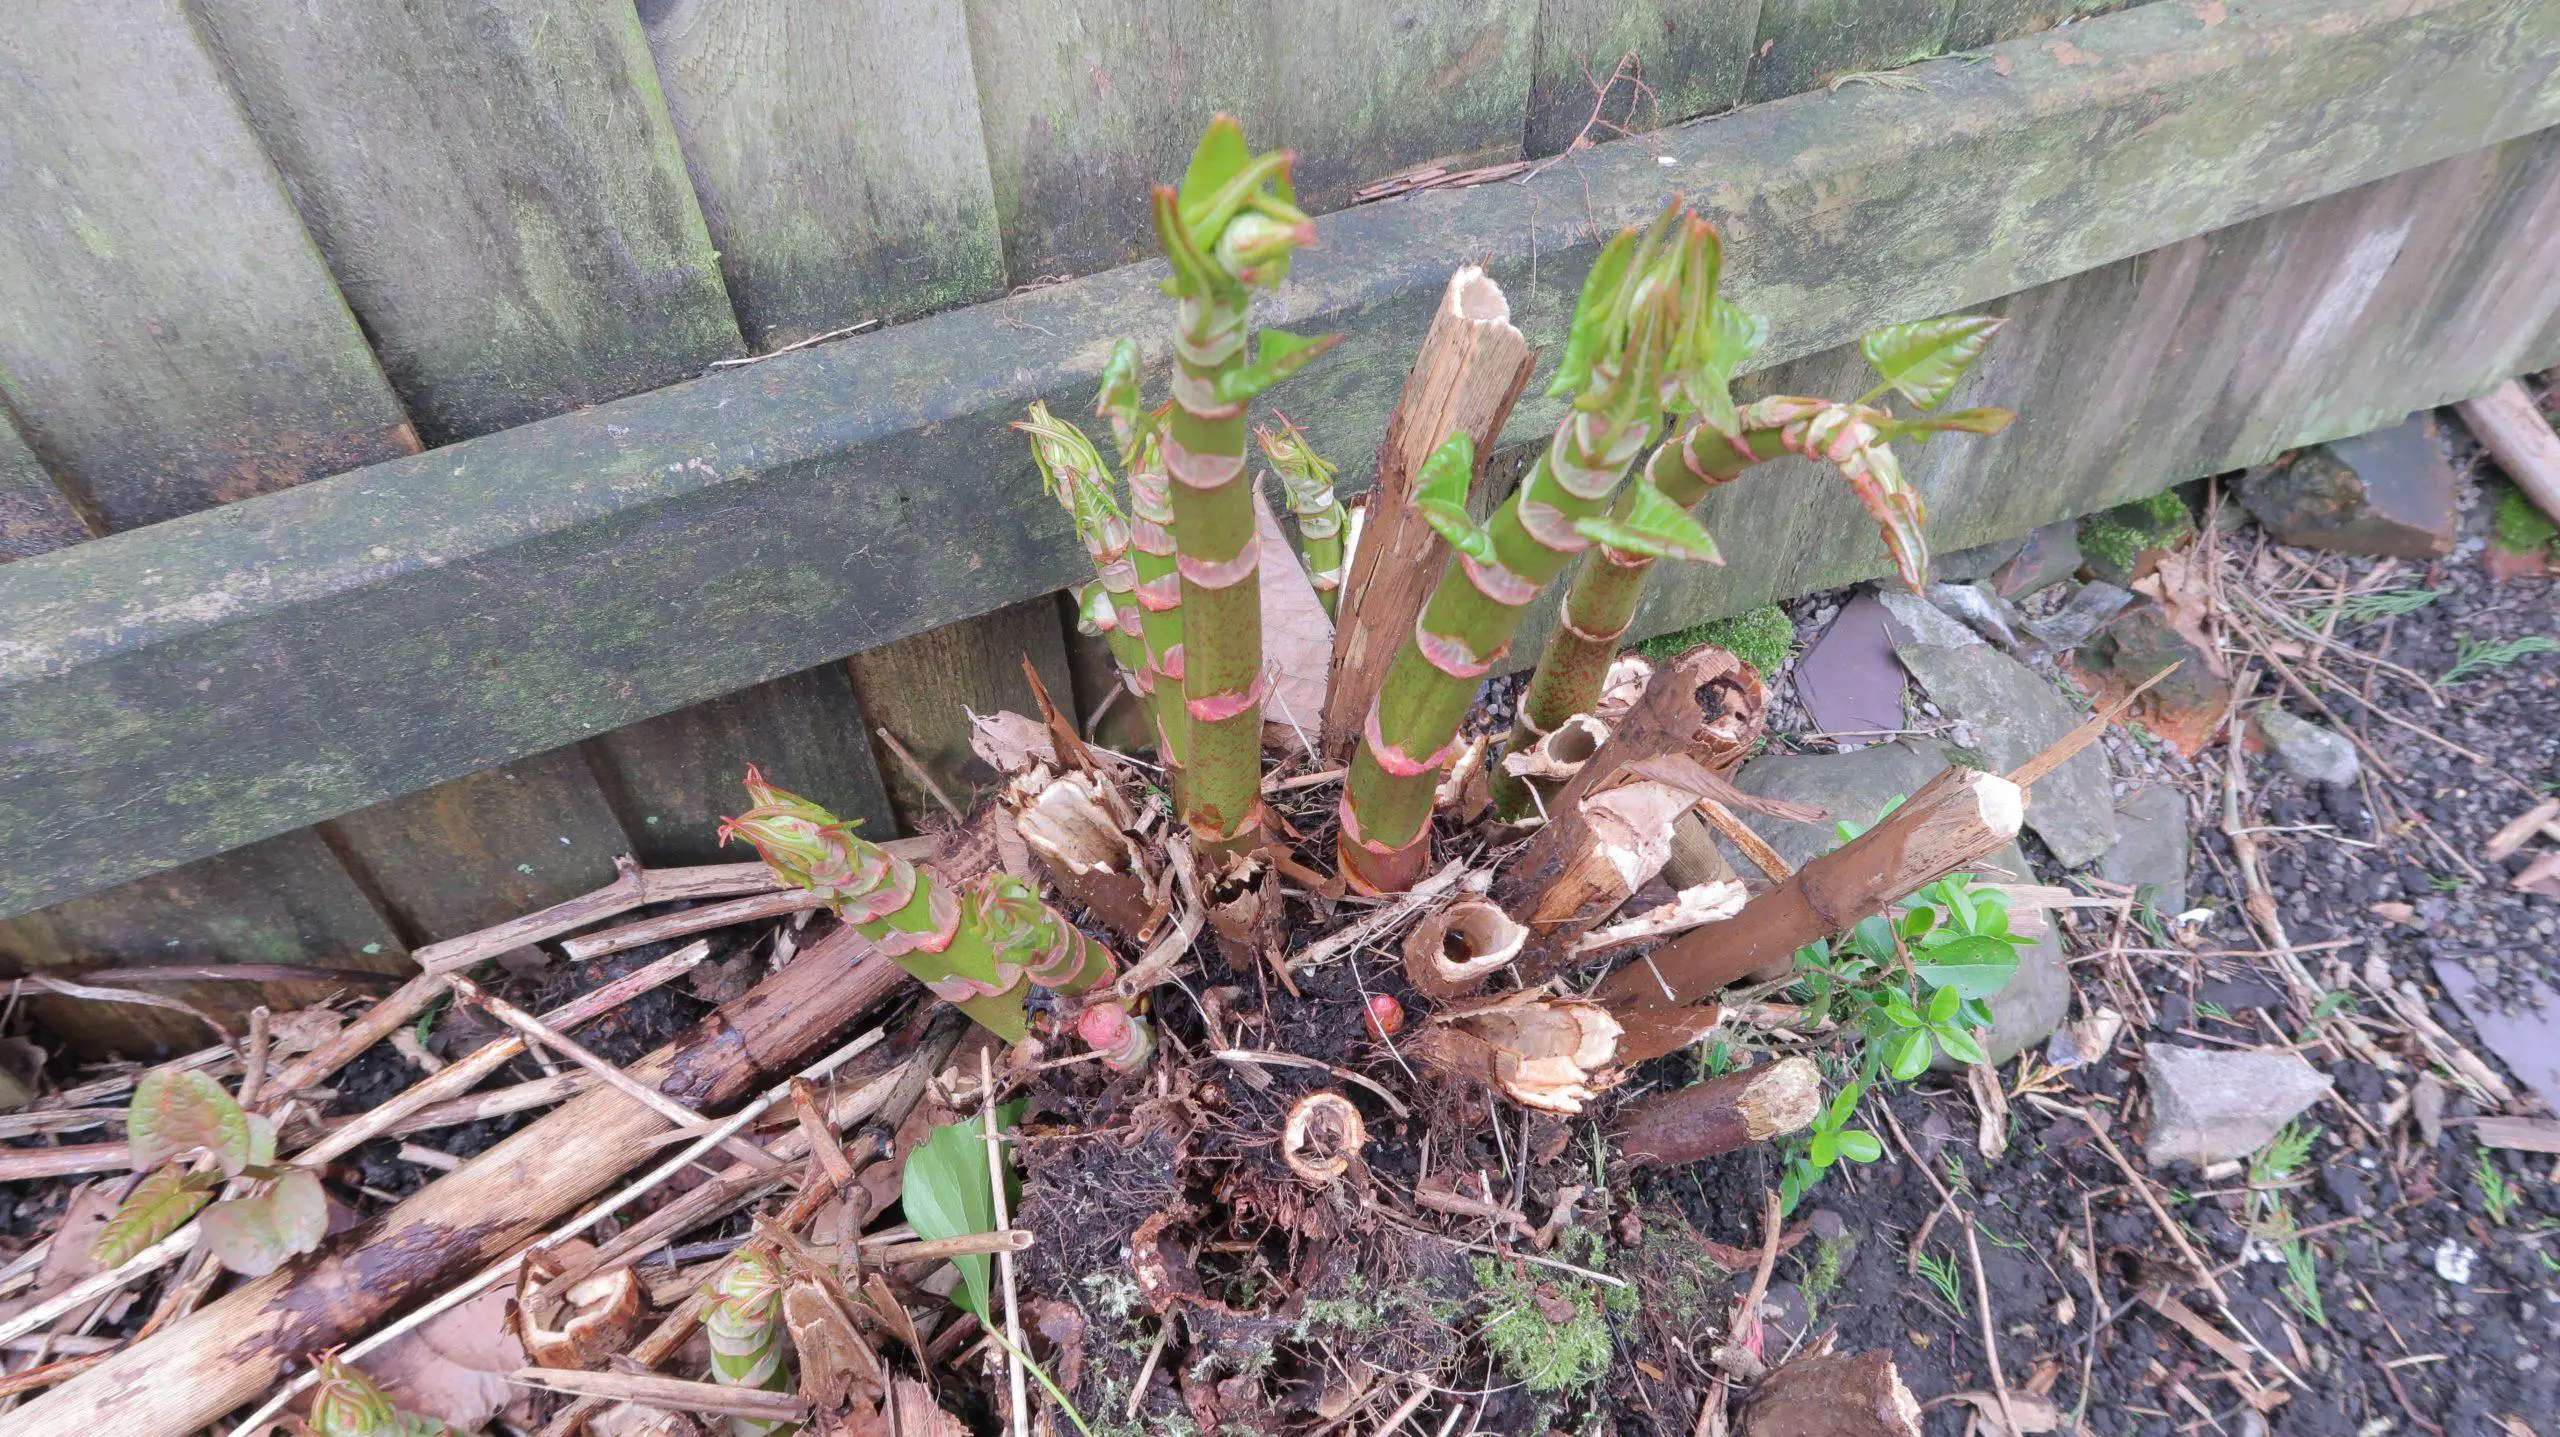 Identifying Japanese knotweed crowns starts with them being clump like and raised slightly above the ground